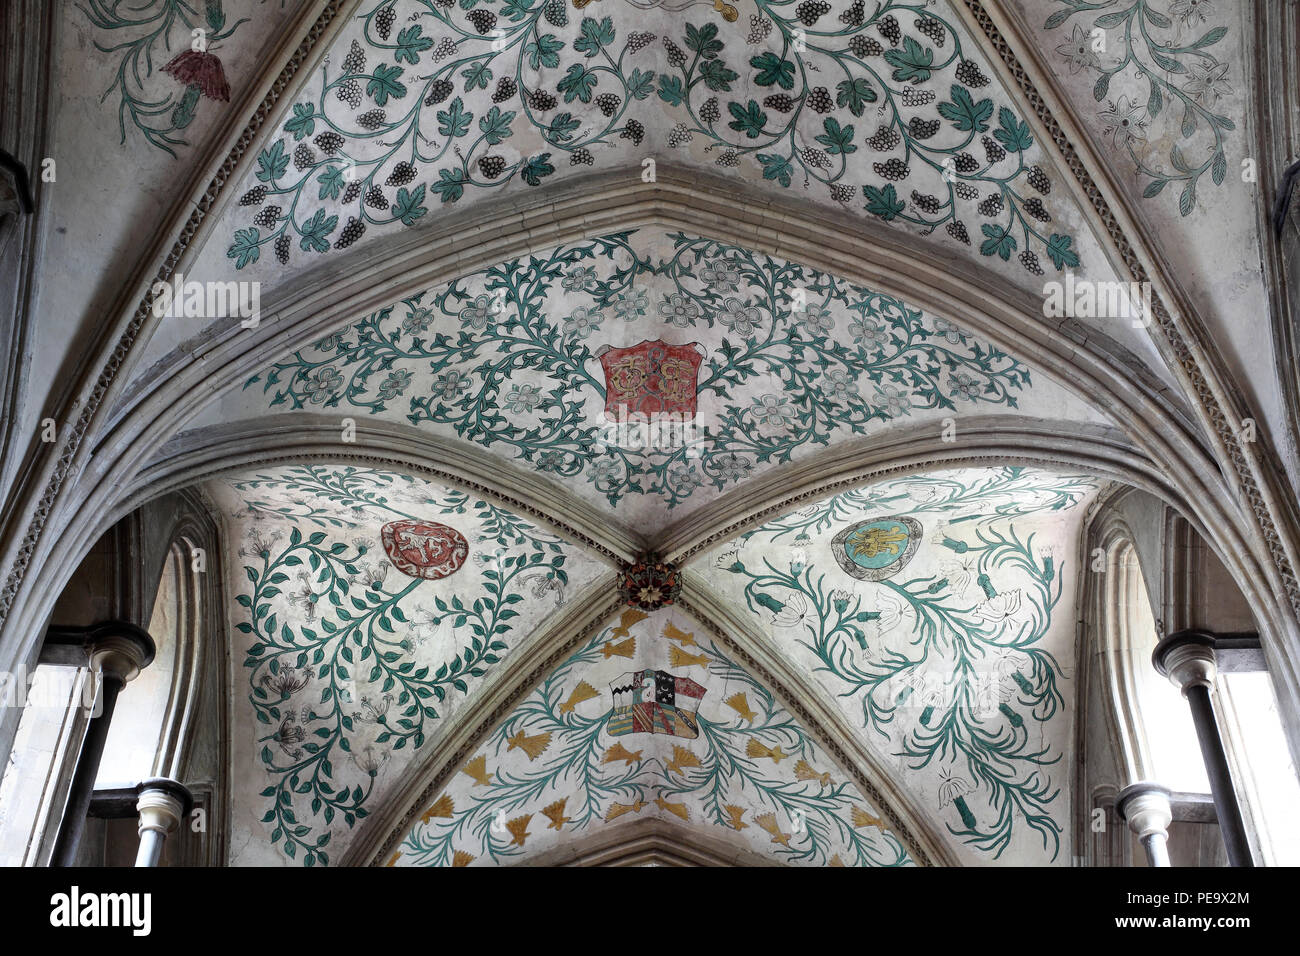 The ceiling of the Church of St Mary and St Blaise, Boxgrove, West Sussex. Foliage and heraldry painted in the mid-16C by Lambert Bernard. Stock Photo